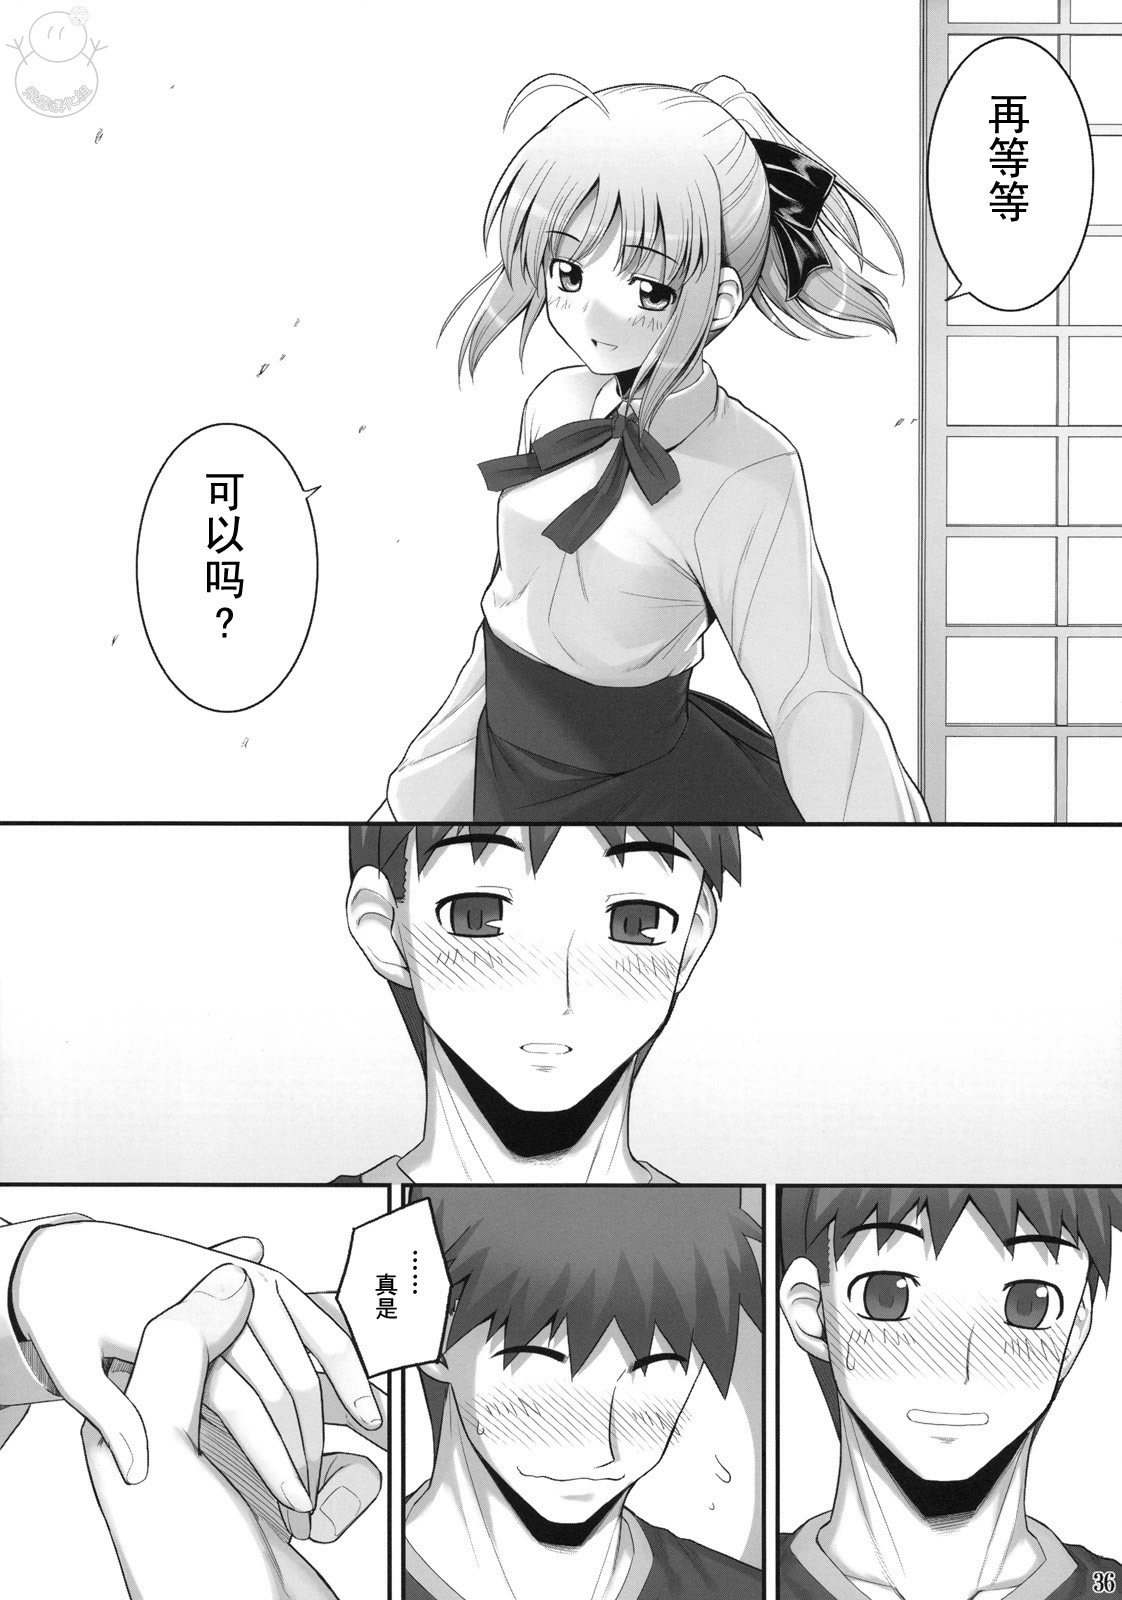 (C75) [RUBBISH Selecting Squad (Namonashi)] RE 10 (Fate/stay night) [Chinese] [飞雪汉化组] page 35 full